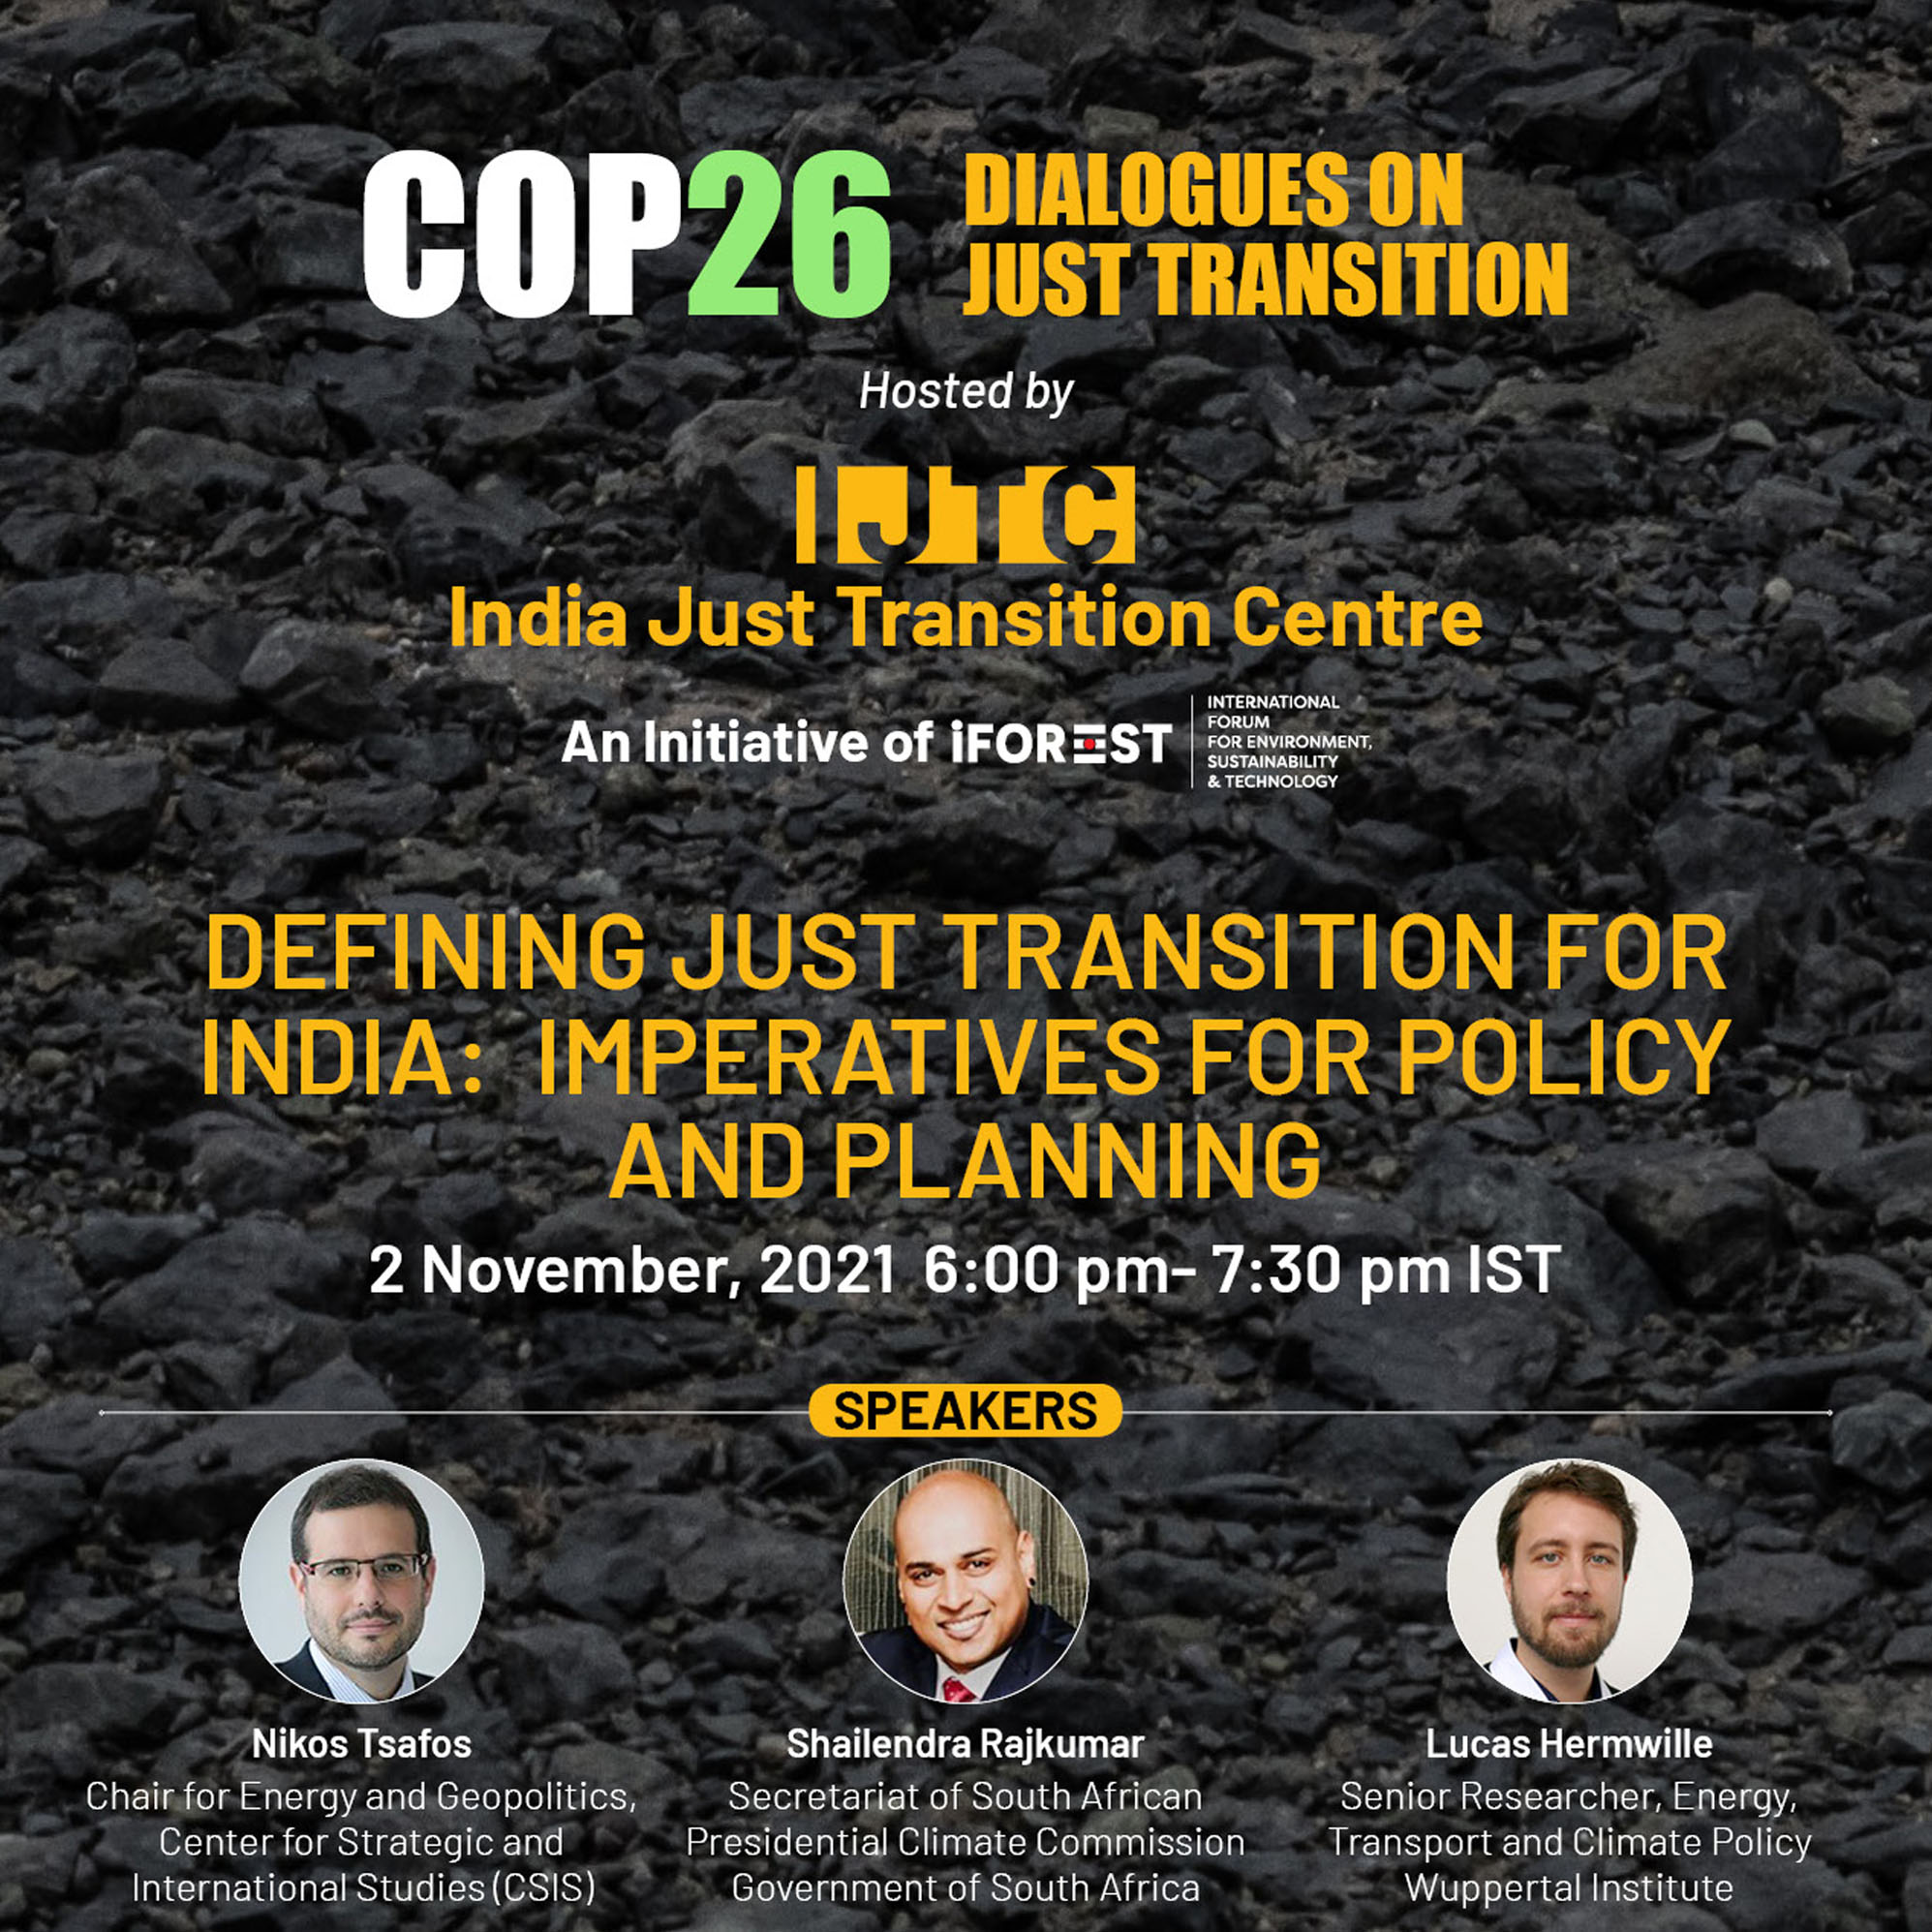 Event - COP26 - Dialogues on Just Transition